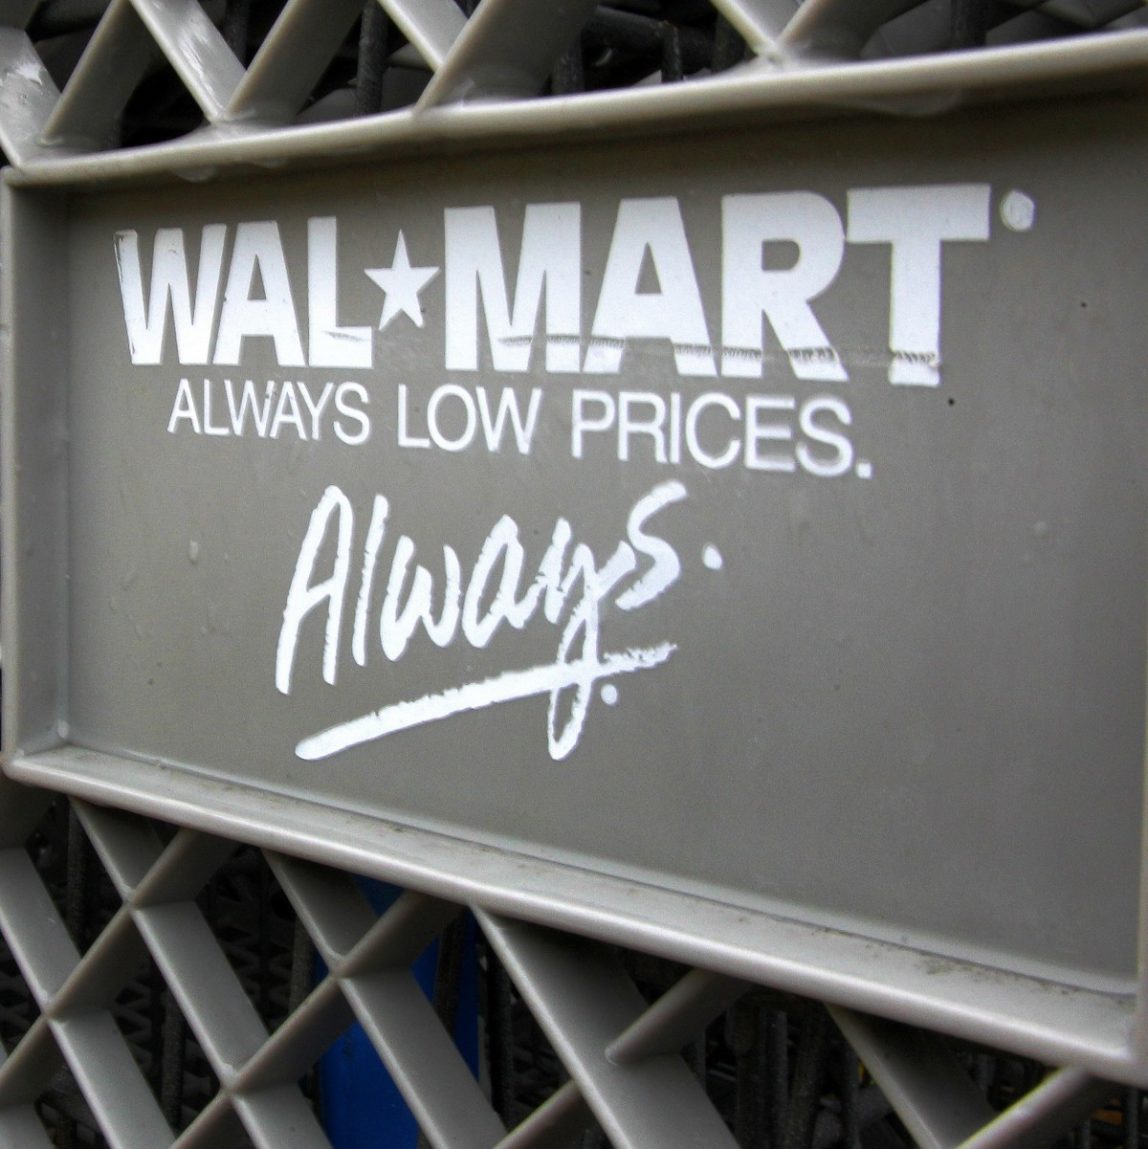 In this Nov. 14, 2011 file photo, shopping carts are photographed outside the Wal-Mart store in Mayfield Hts., Ohio. (AP Photo/Amy Sancetta, File)